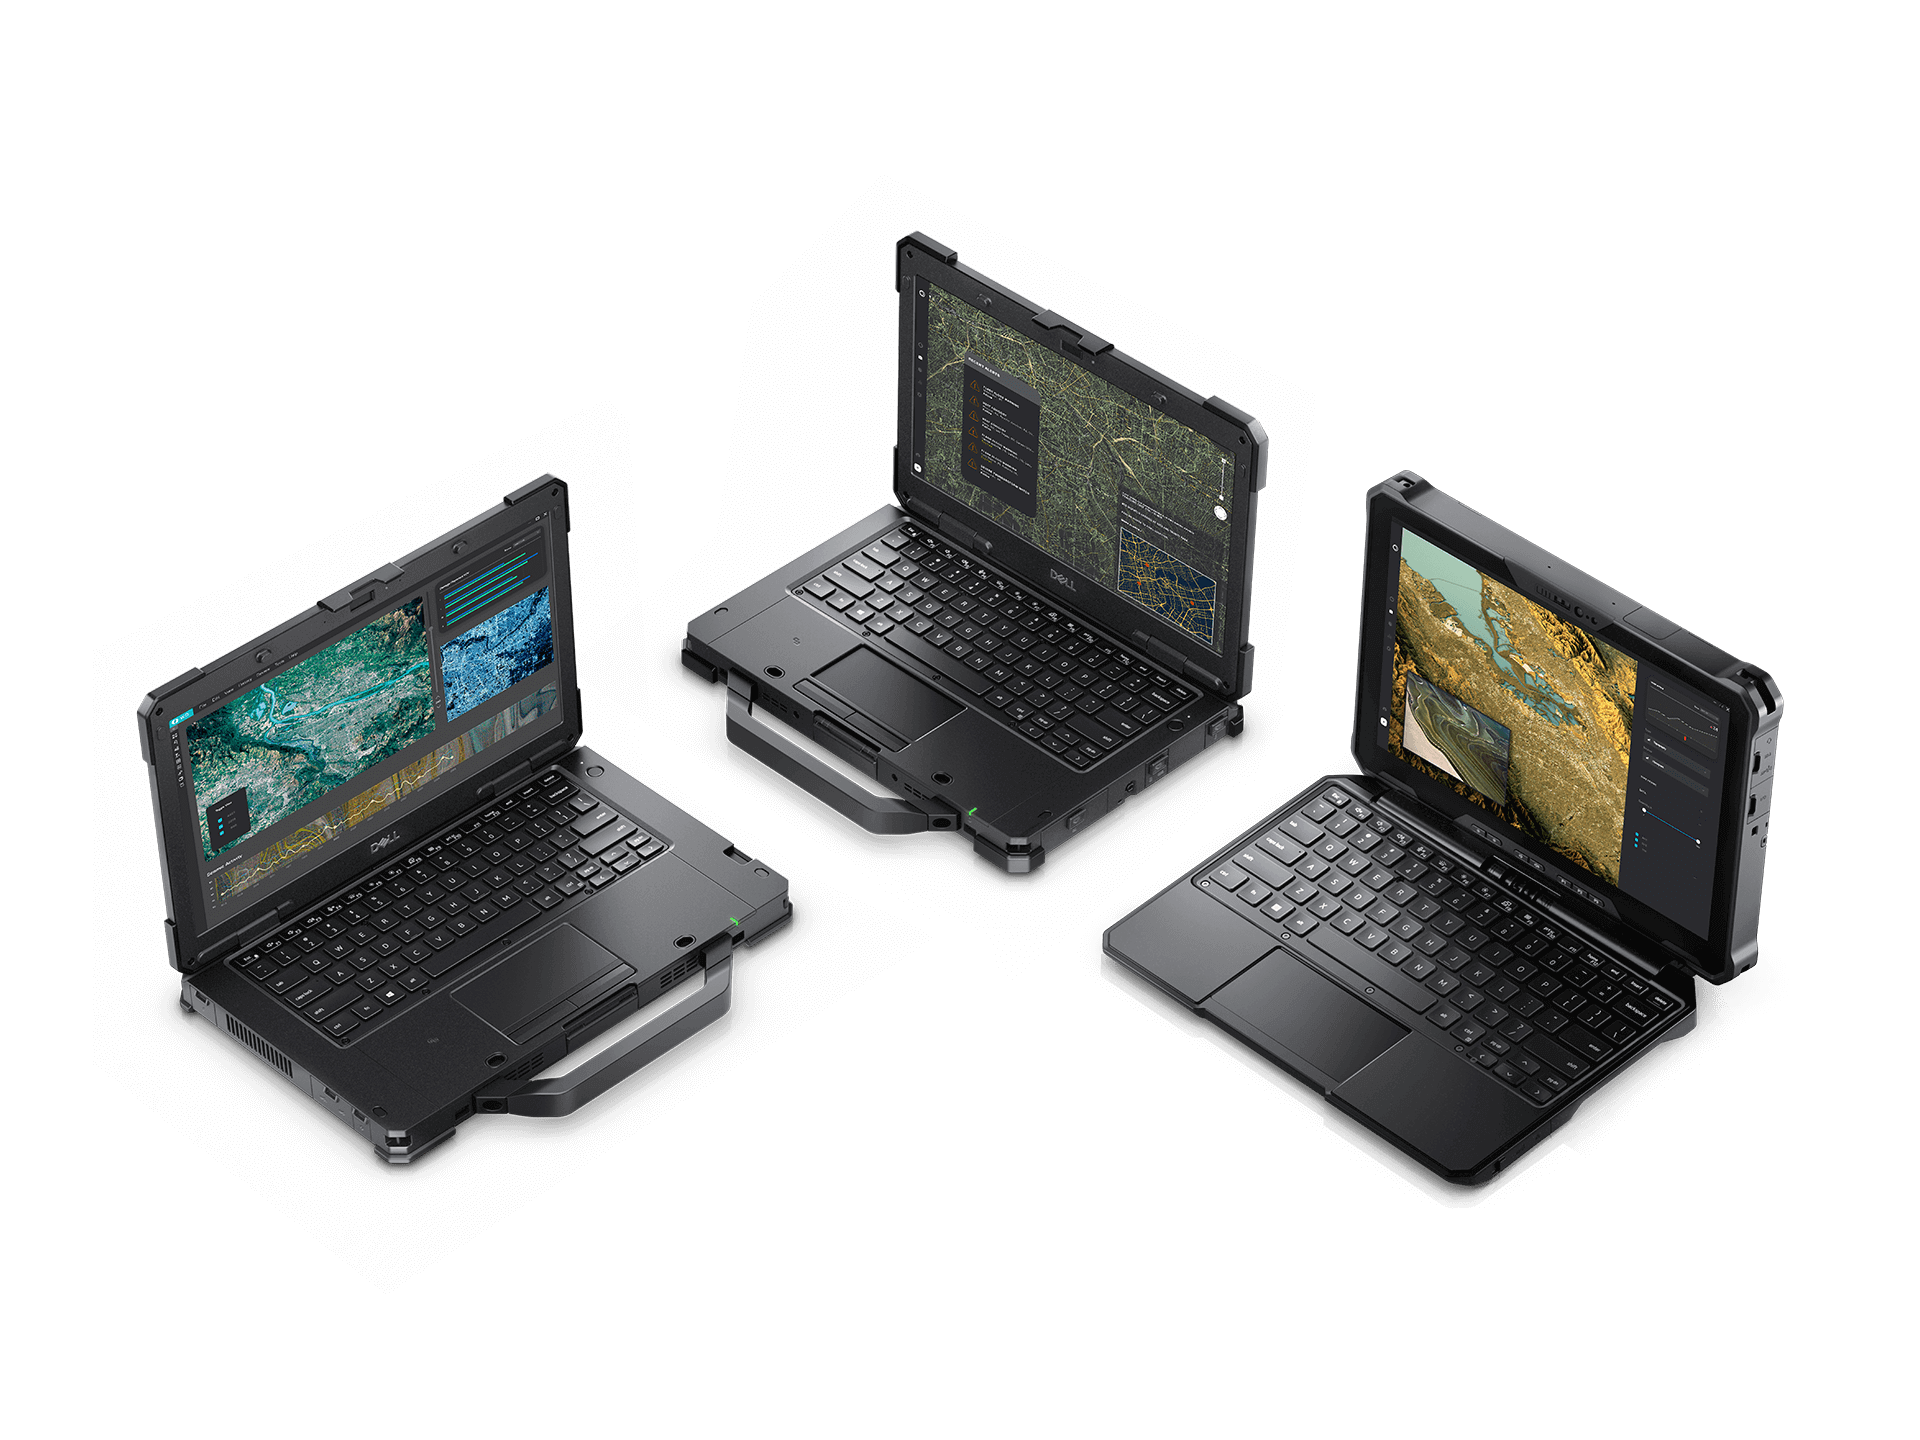 Latitude 5000/7000 Series Rugged Touch Notebooks & Rugged Tablet